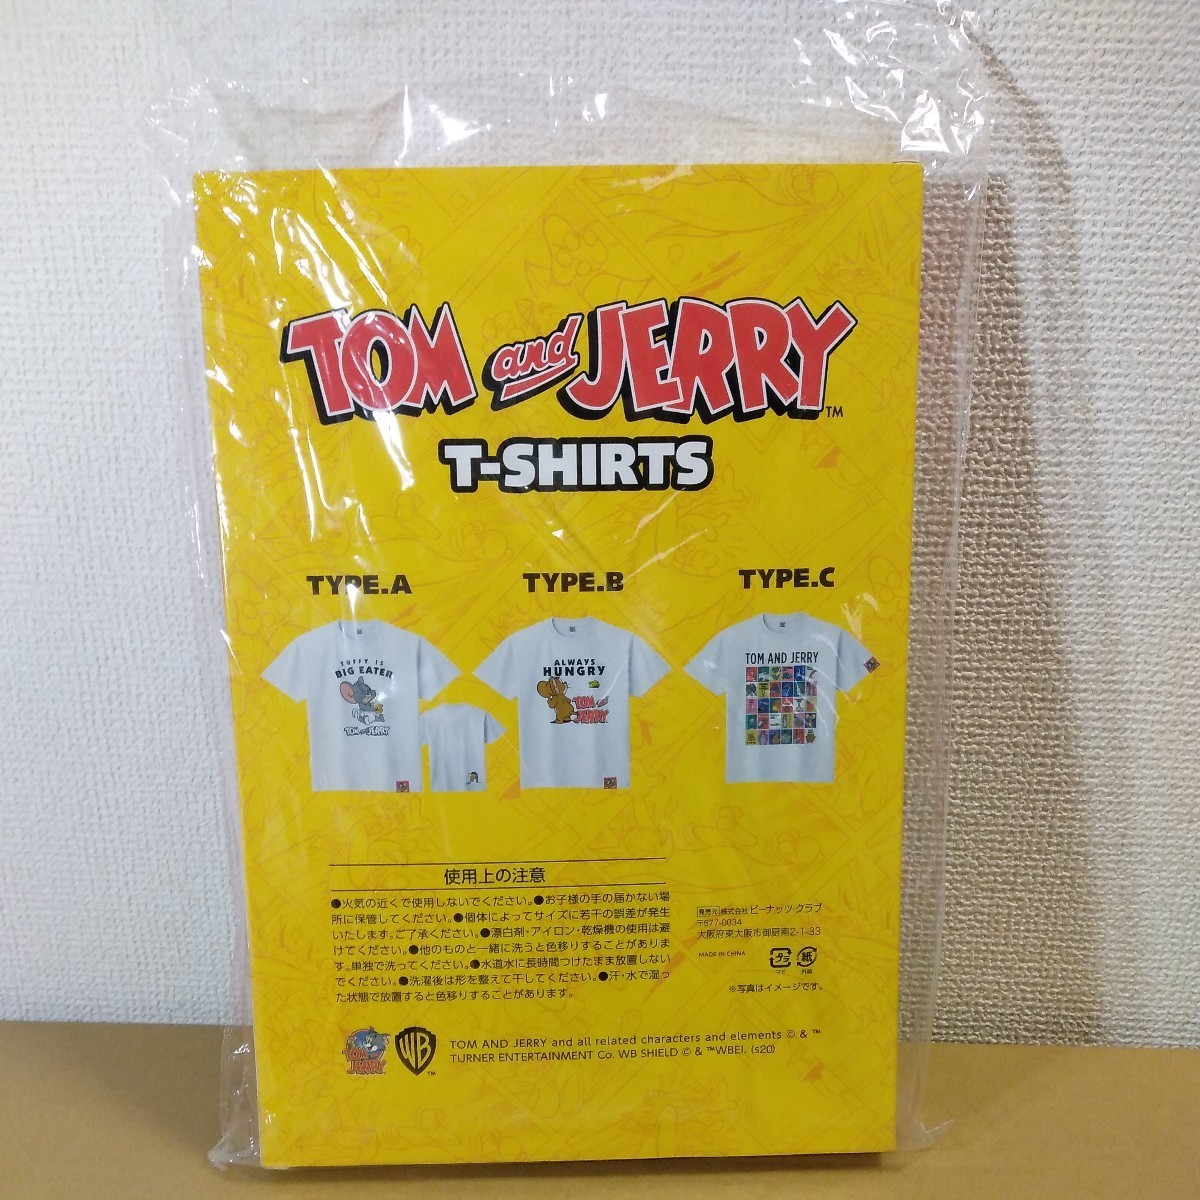 TOM&JERRY Tom . Jerry T-shirt free size type C Peanuts Club made in China unused goods no check details unknown junk treatment 